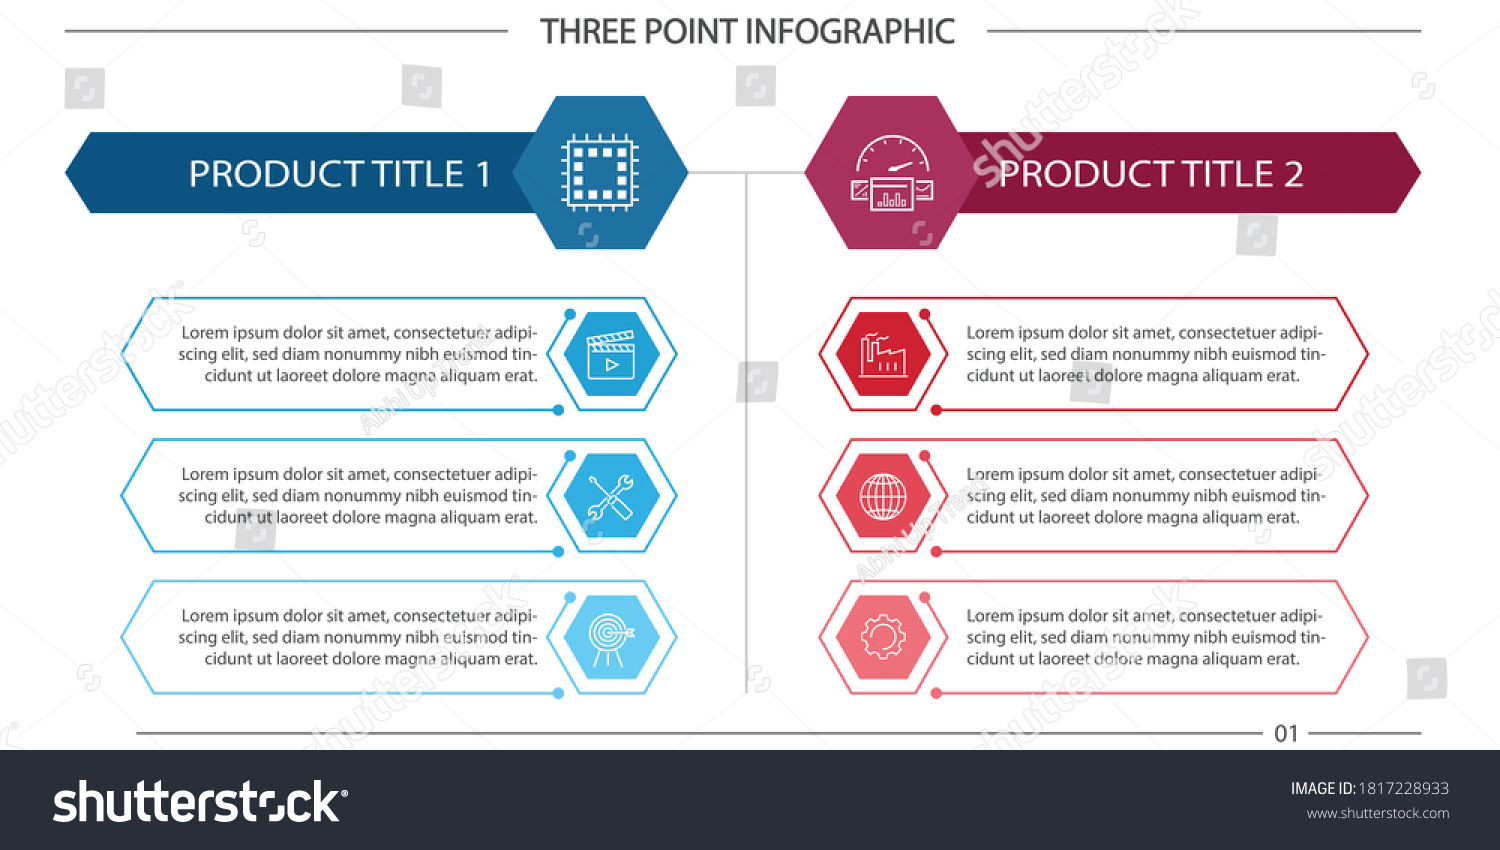 3 Point Infographic - Product Compare, Process Compare #1817228933